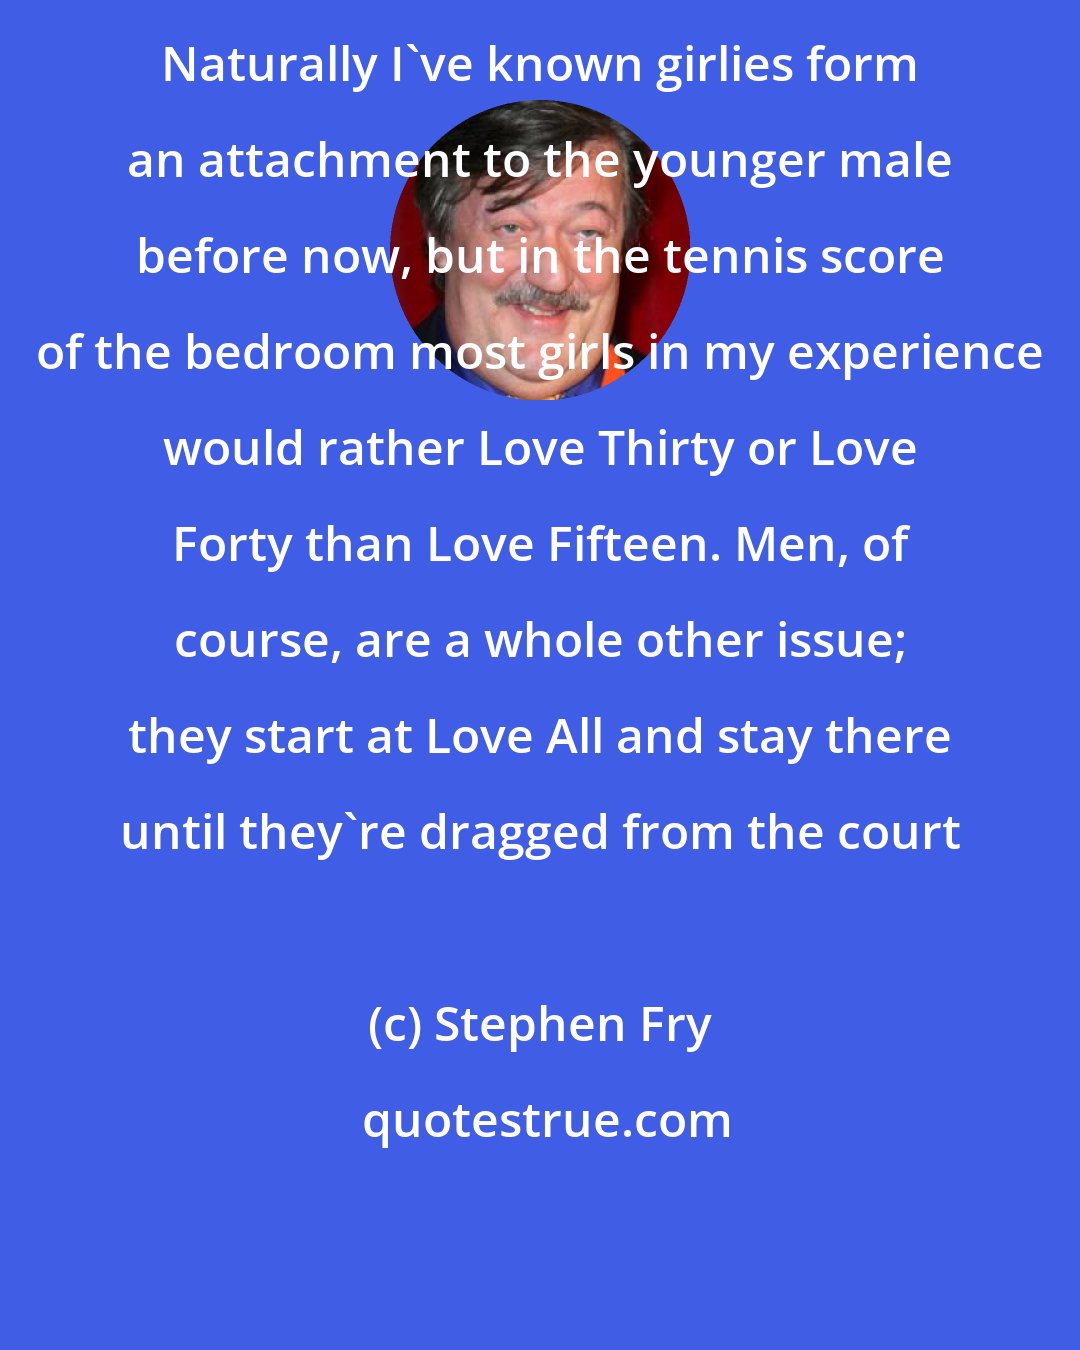 Stephen Fry: Naturally I've known girlies form an attachment to the younger male before now, but in the tennis score of the bedroom most girls in my experience would rather Love Thirty or Love Forty than Love Fifteen. Men, of course, are a whole other issue; they start at Love All and stay there until they're dragged from the court